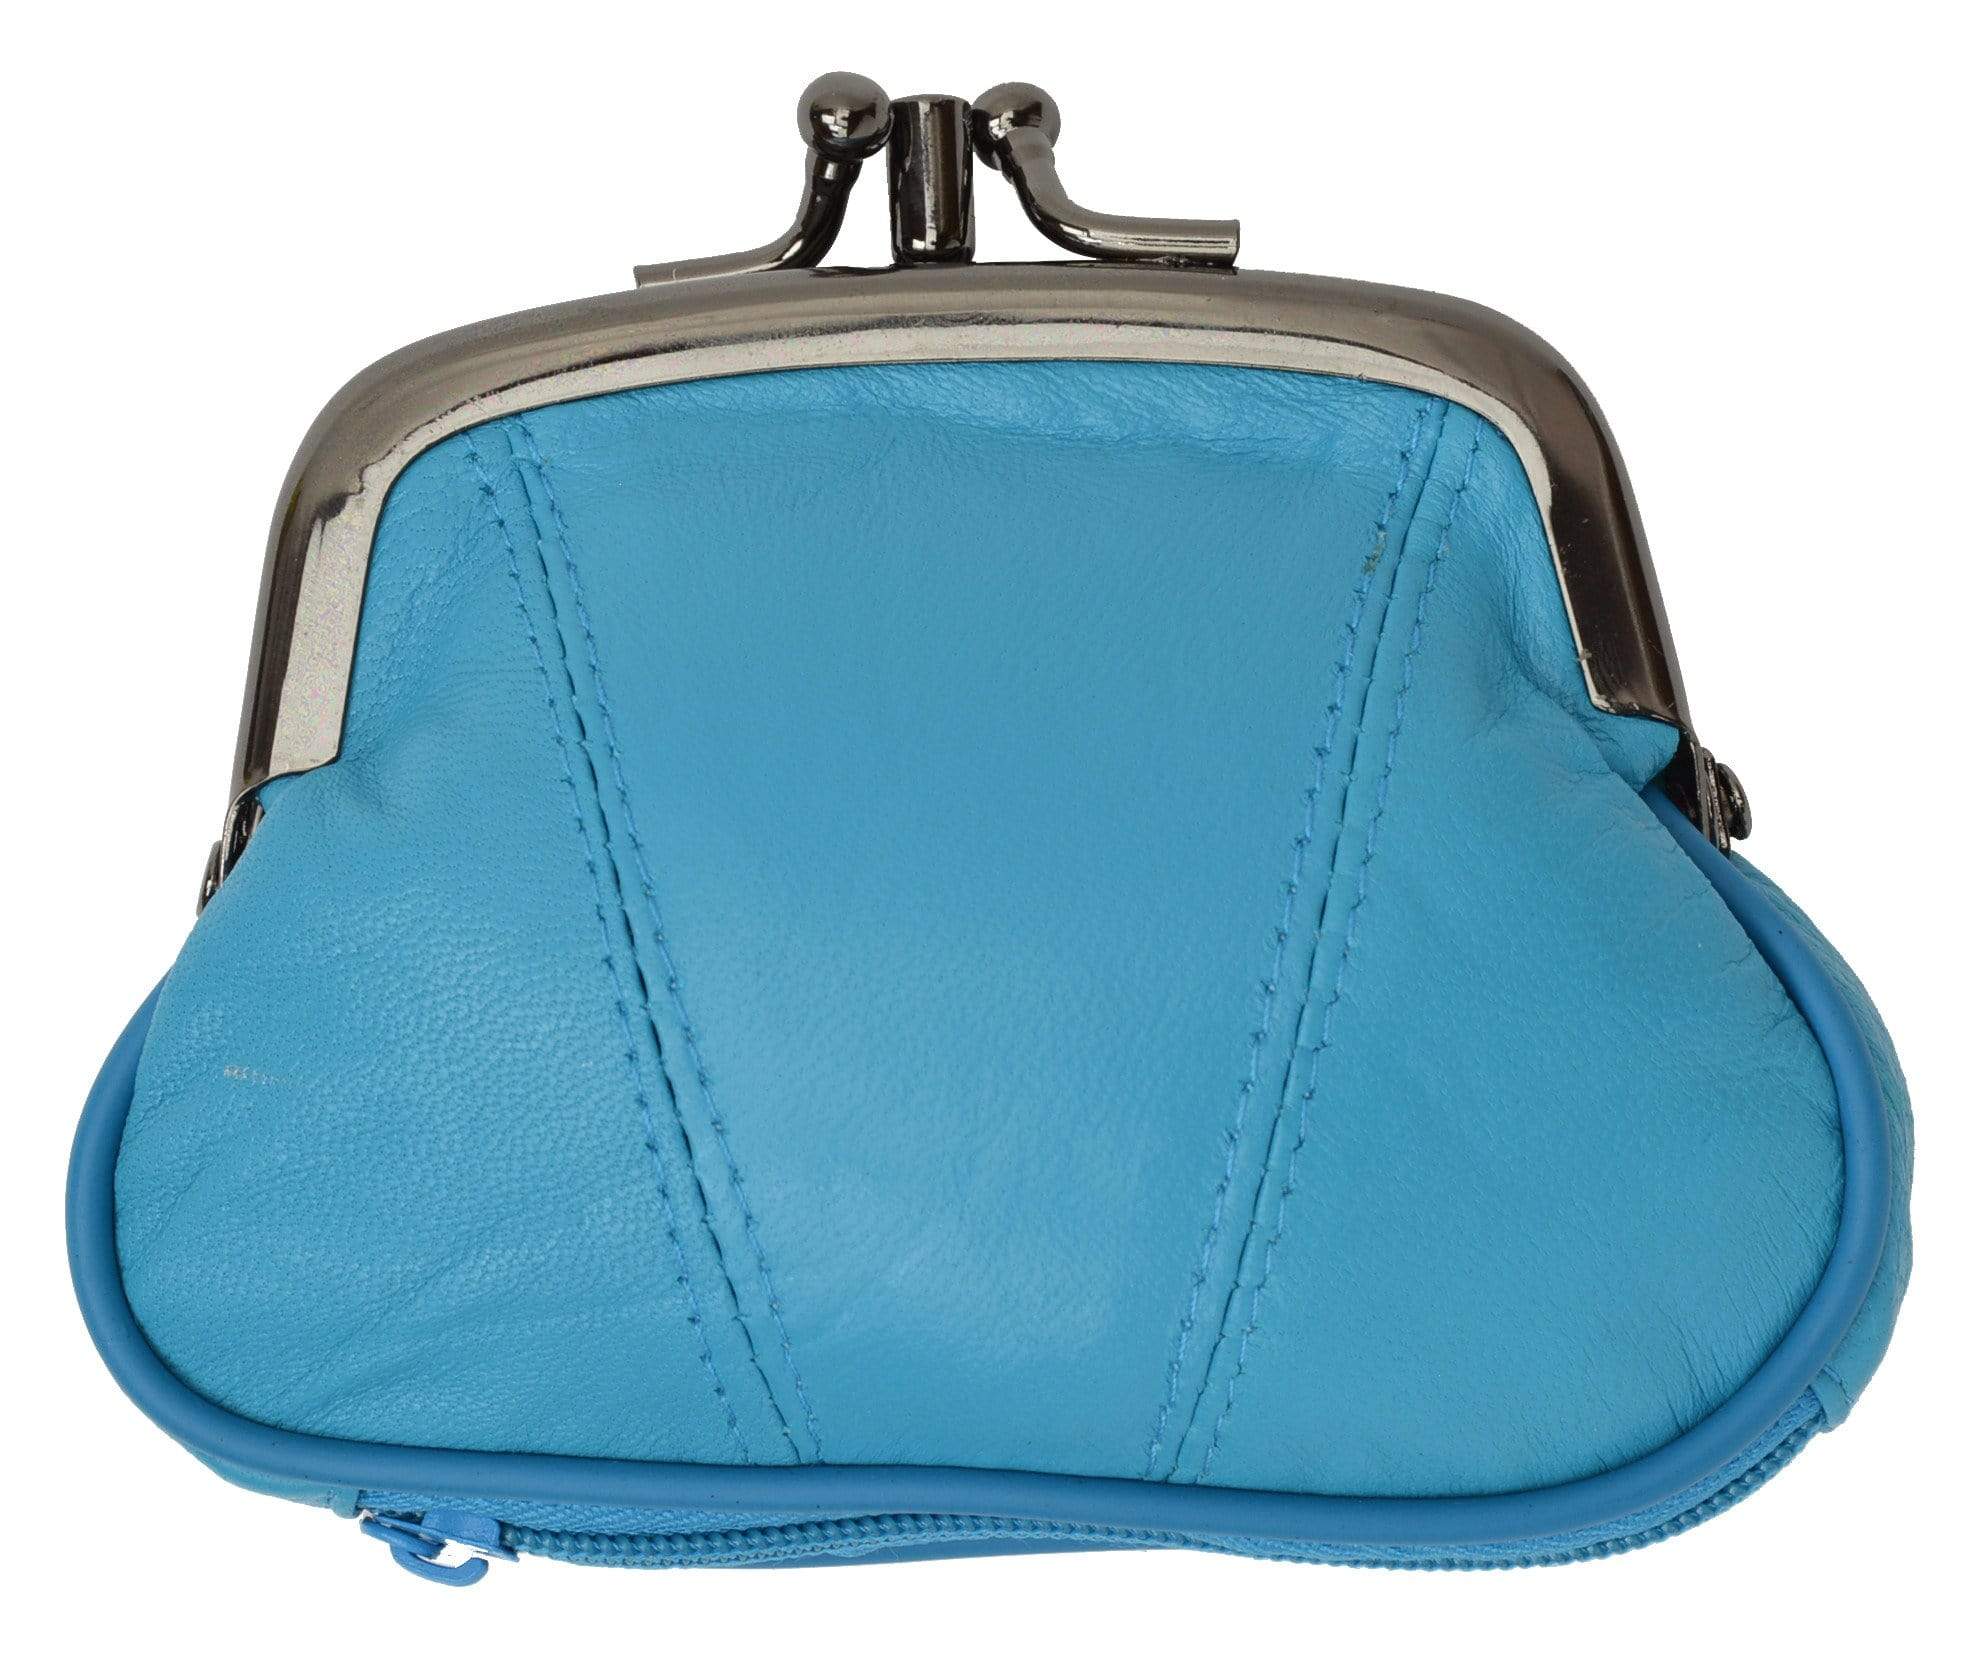 Genuine Leather Small Change Purse with Clasp Y970 (C) - Walmart.com